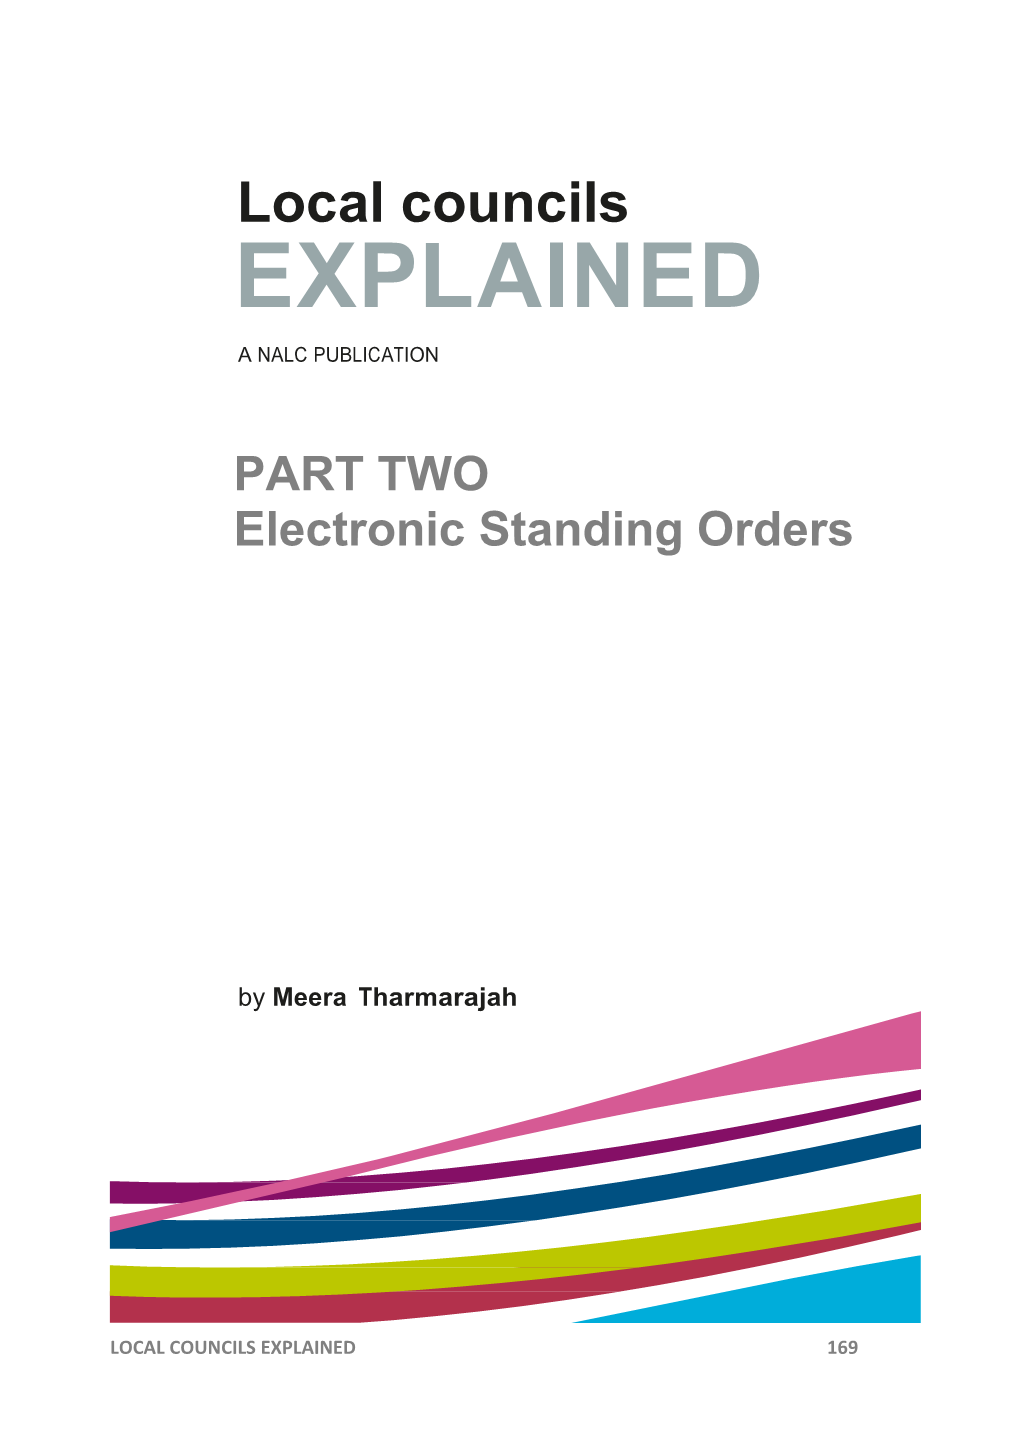 Electronic Standing Orders